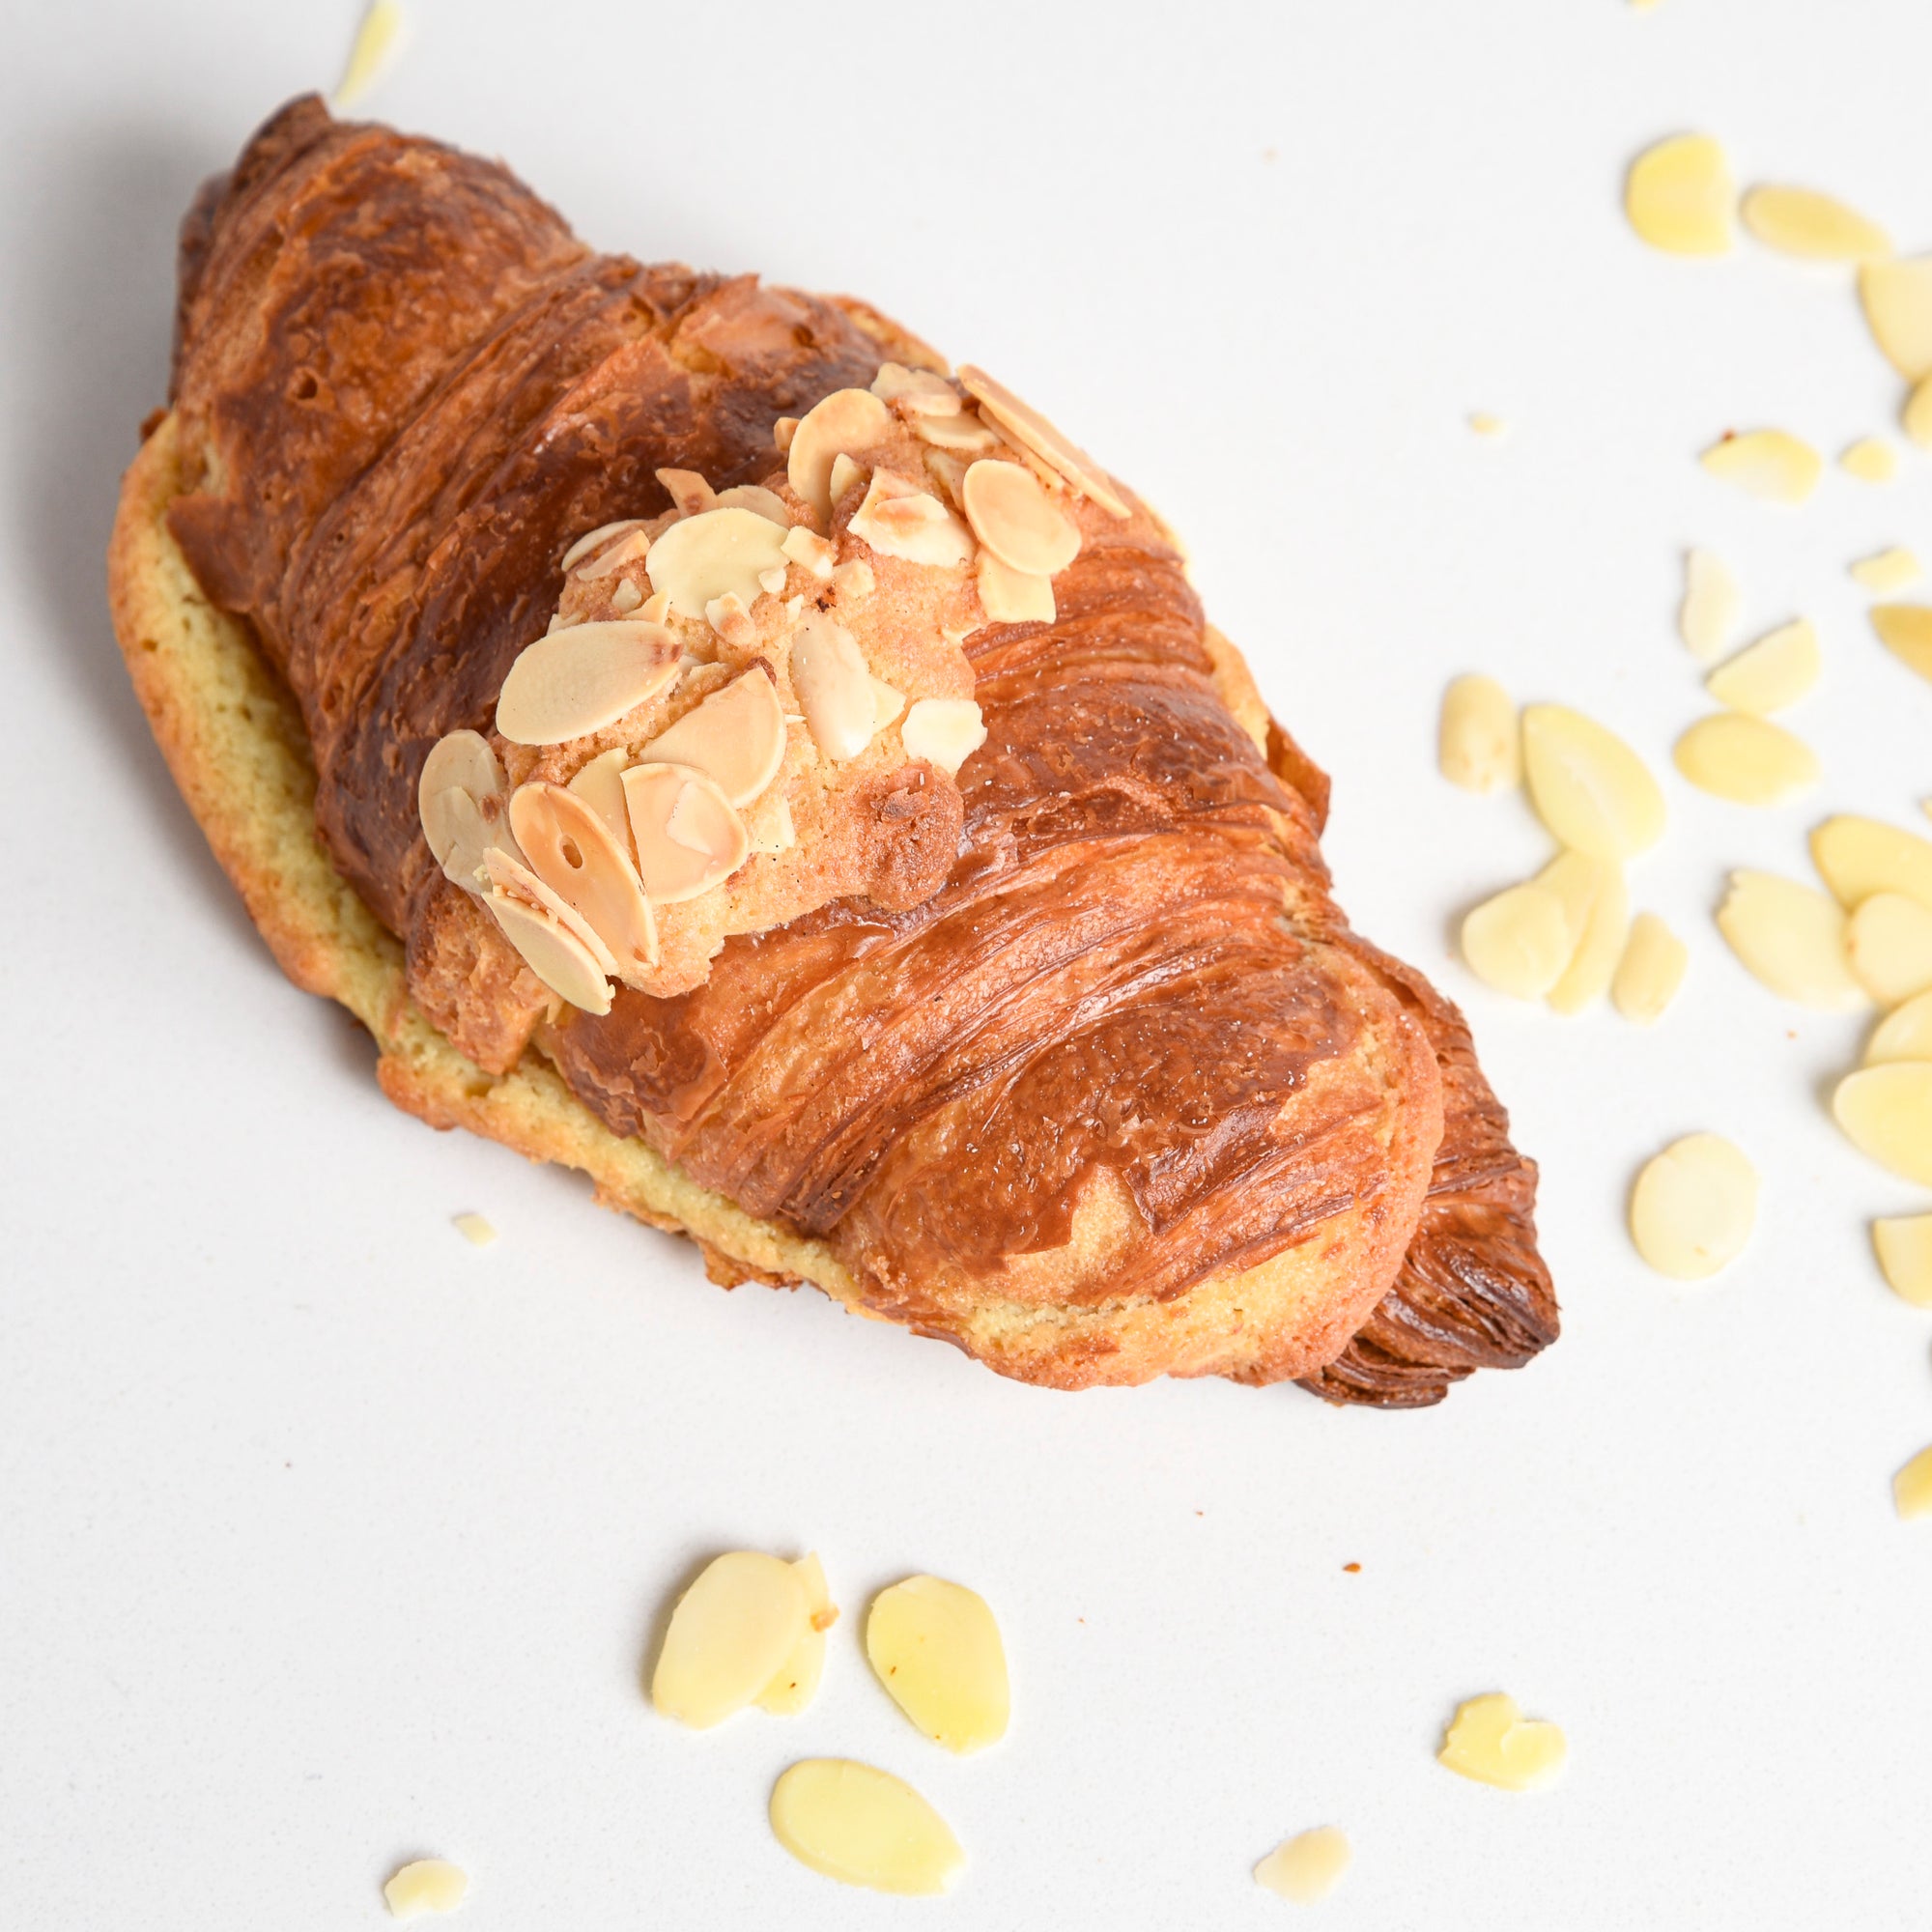 Le fournil bakery croissant aux amandes filled with homemade almond cream